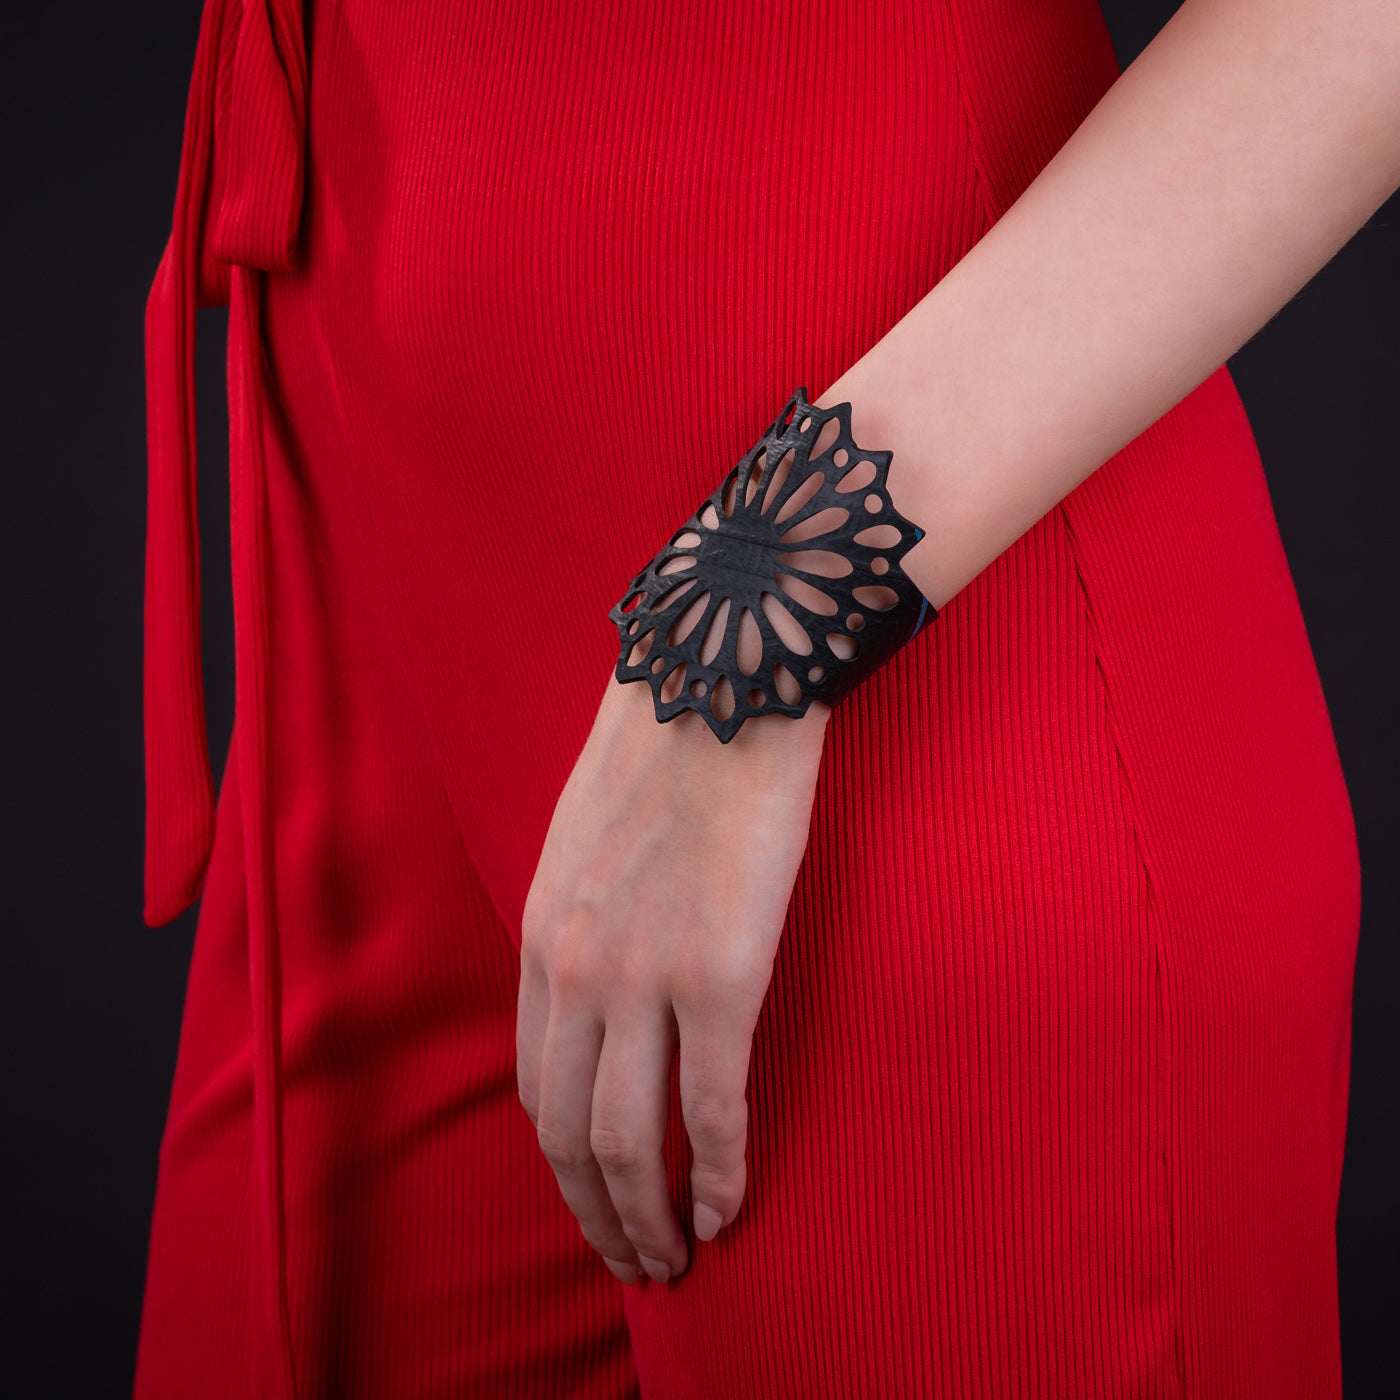 Strawflower Recycled Rubber Bracelet by Paguro Upcycle